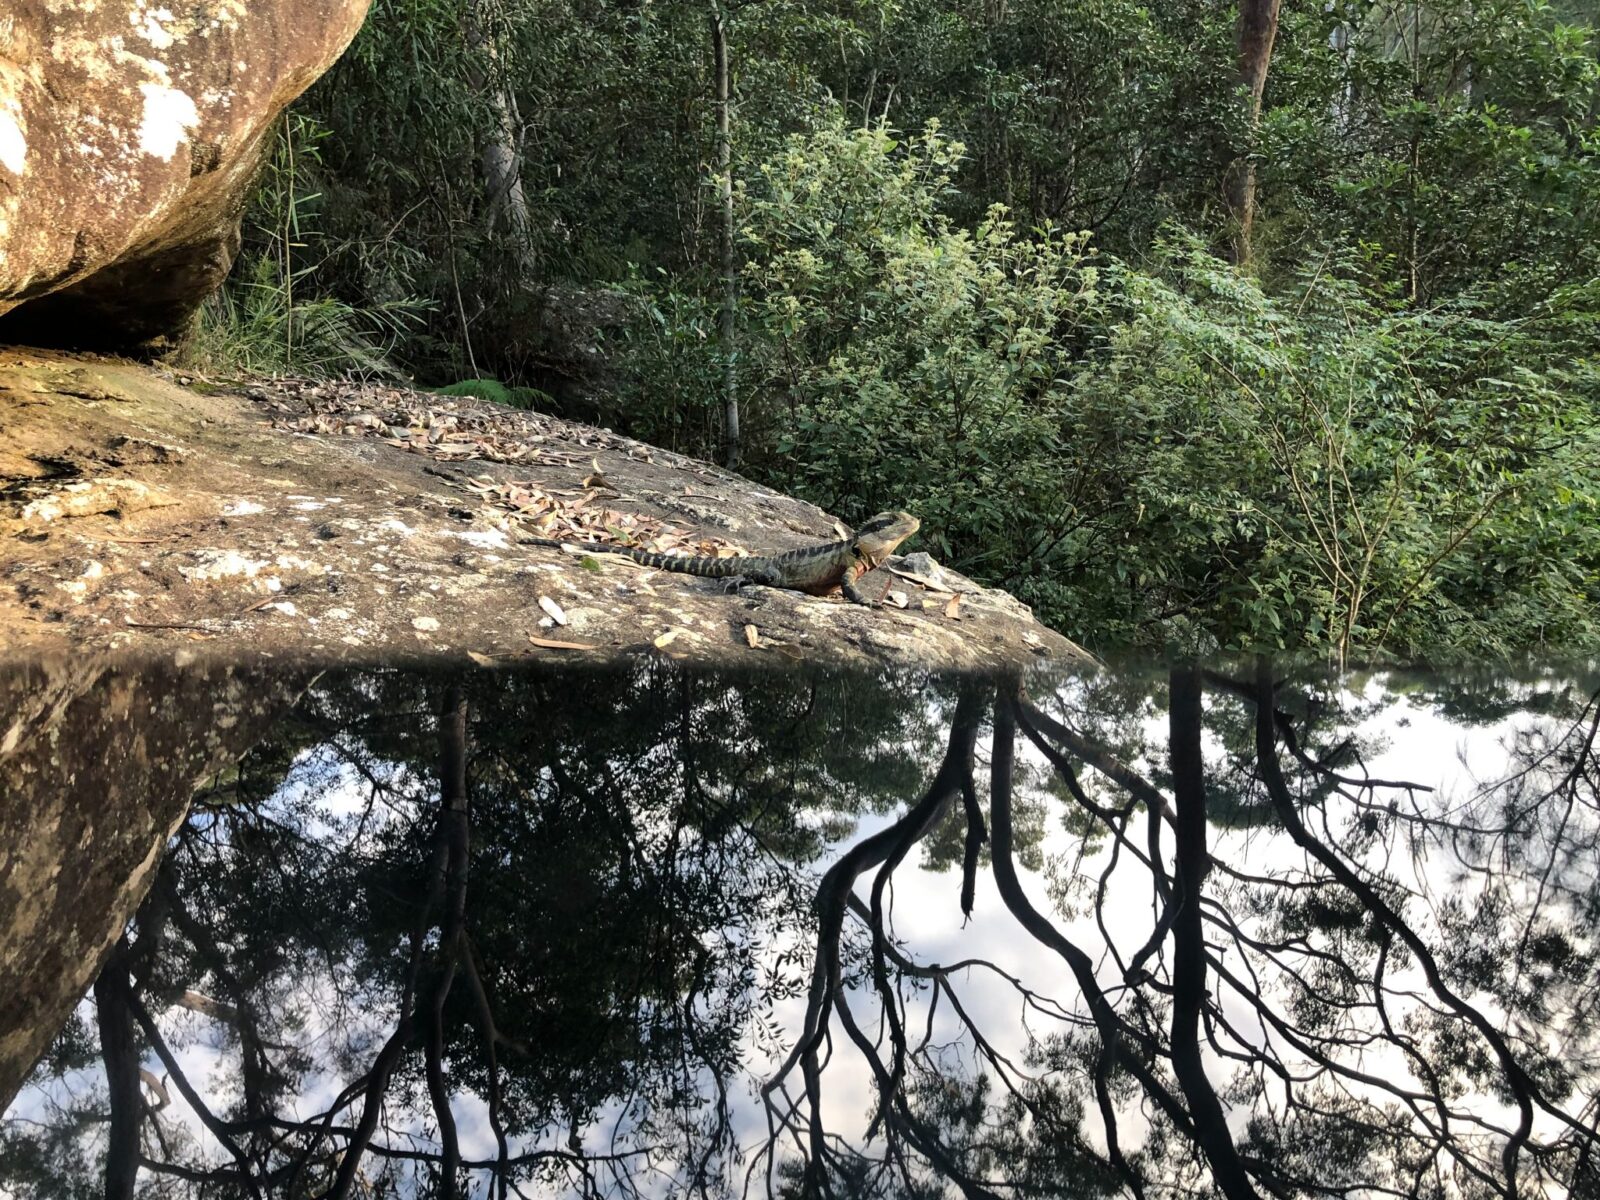 Iguana on a rock and reflected in the water, in a national park. Photo: Tim Ashelford